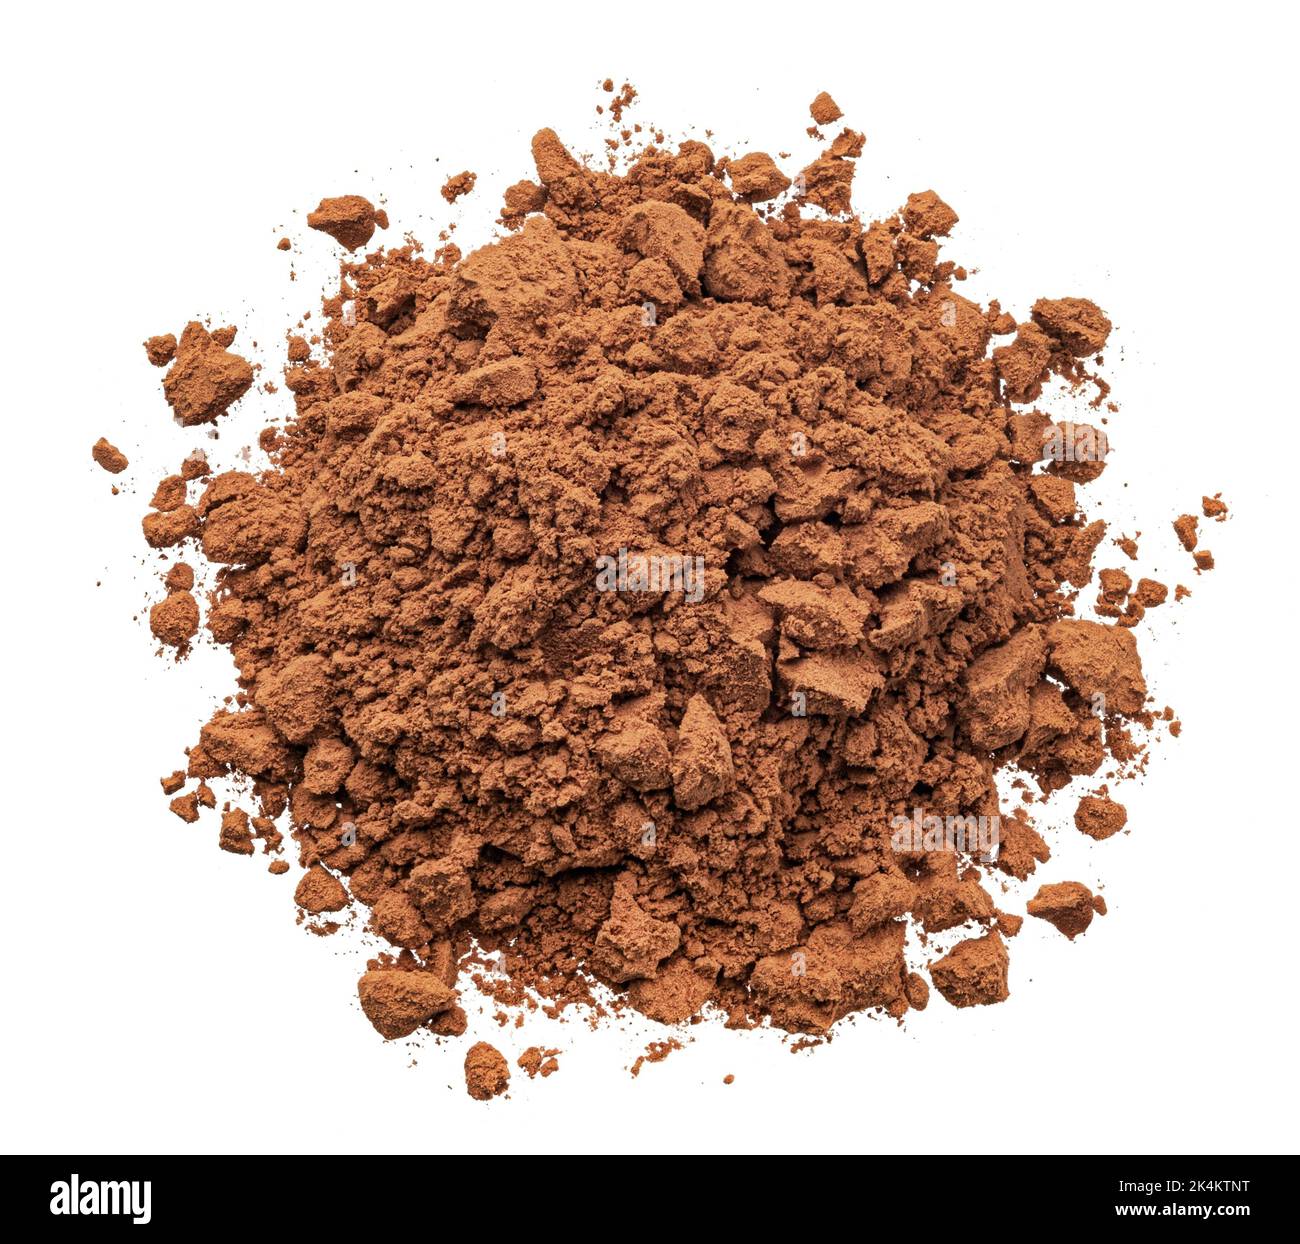 Pile of cocoa powder isolated on white background, top view Stock Photo